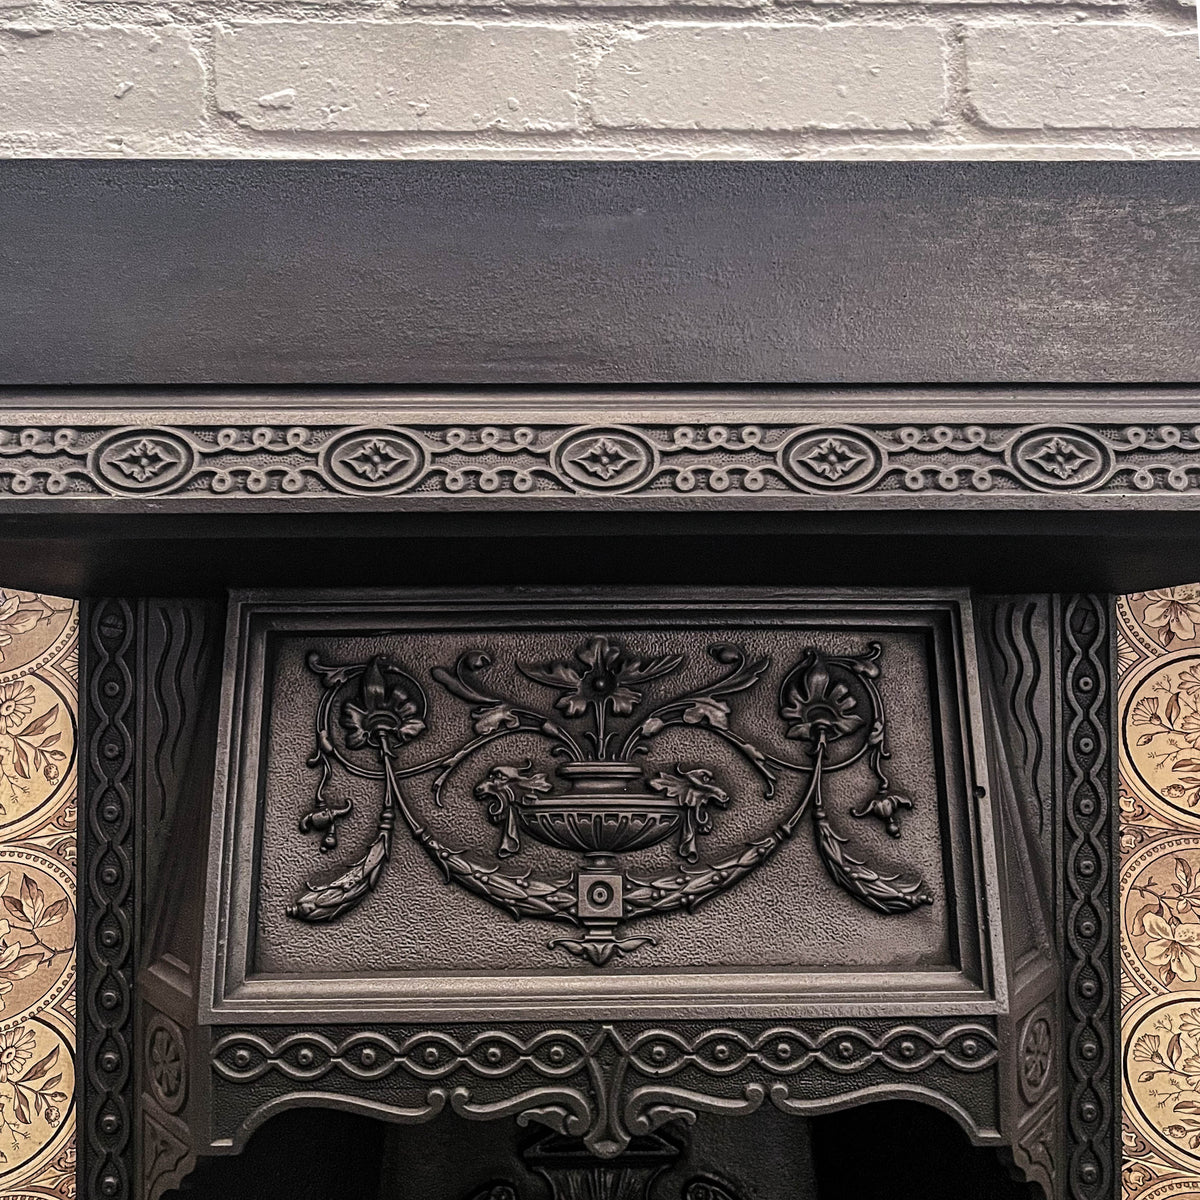 Victorian Antique Tiled Fireplace Insert | The Architectural Forum